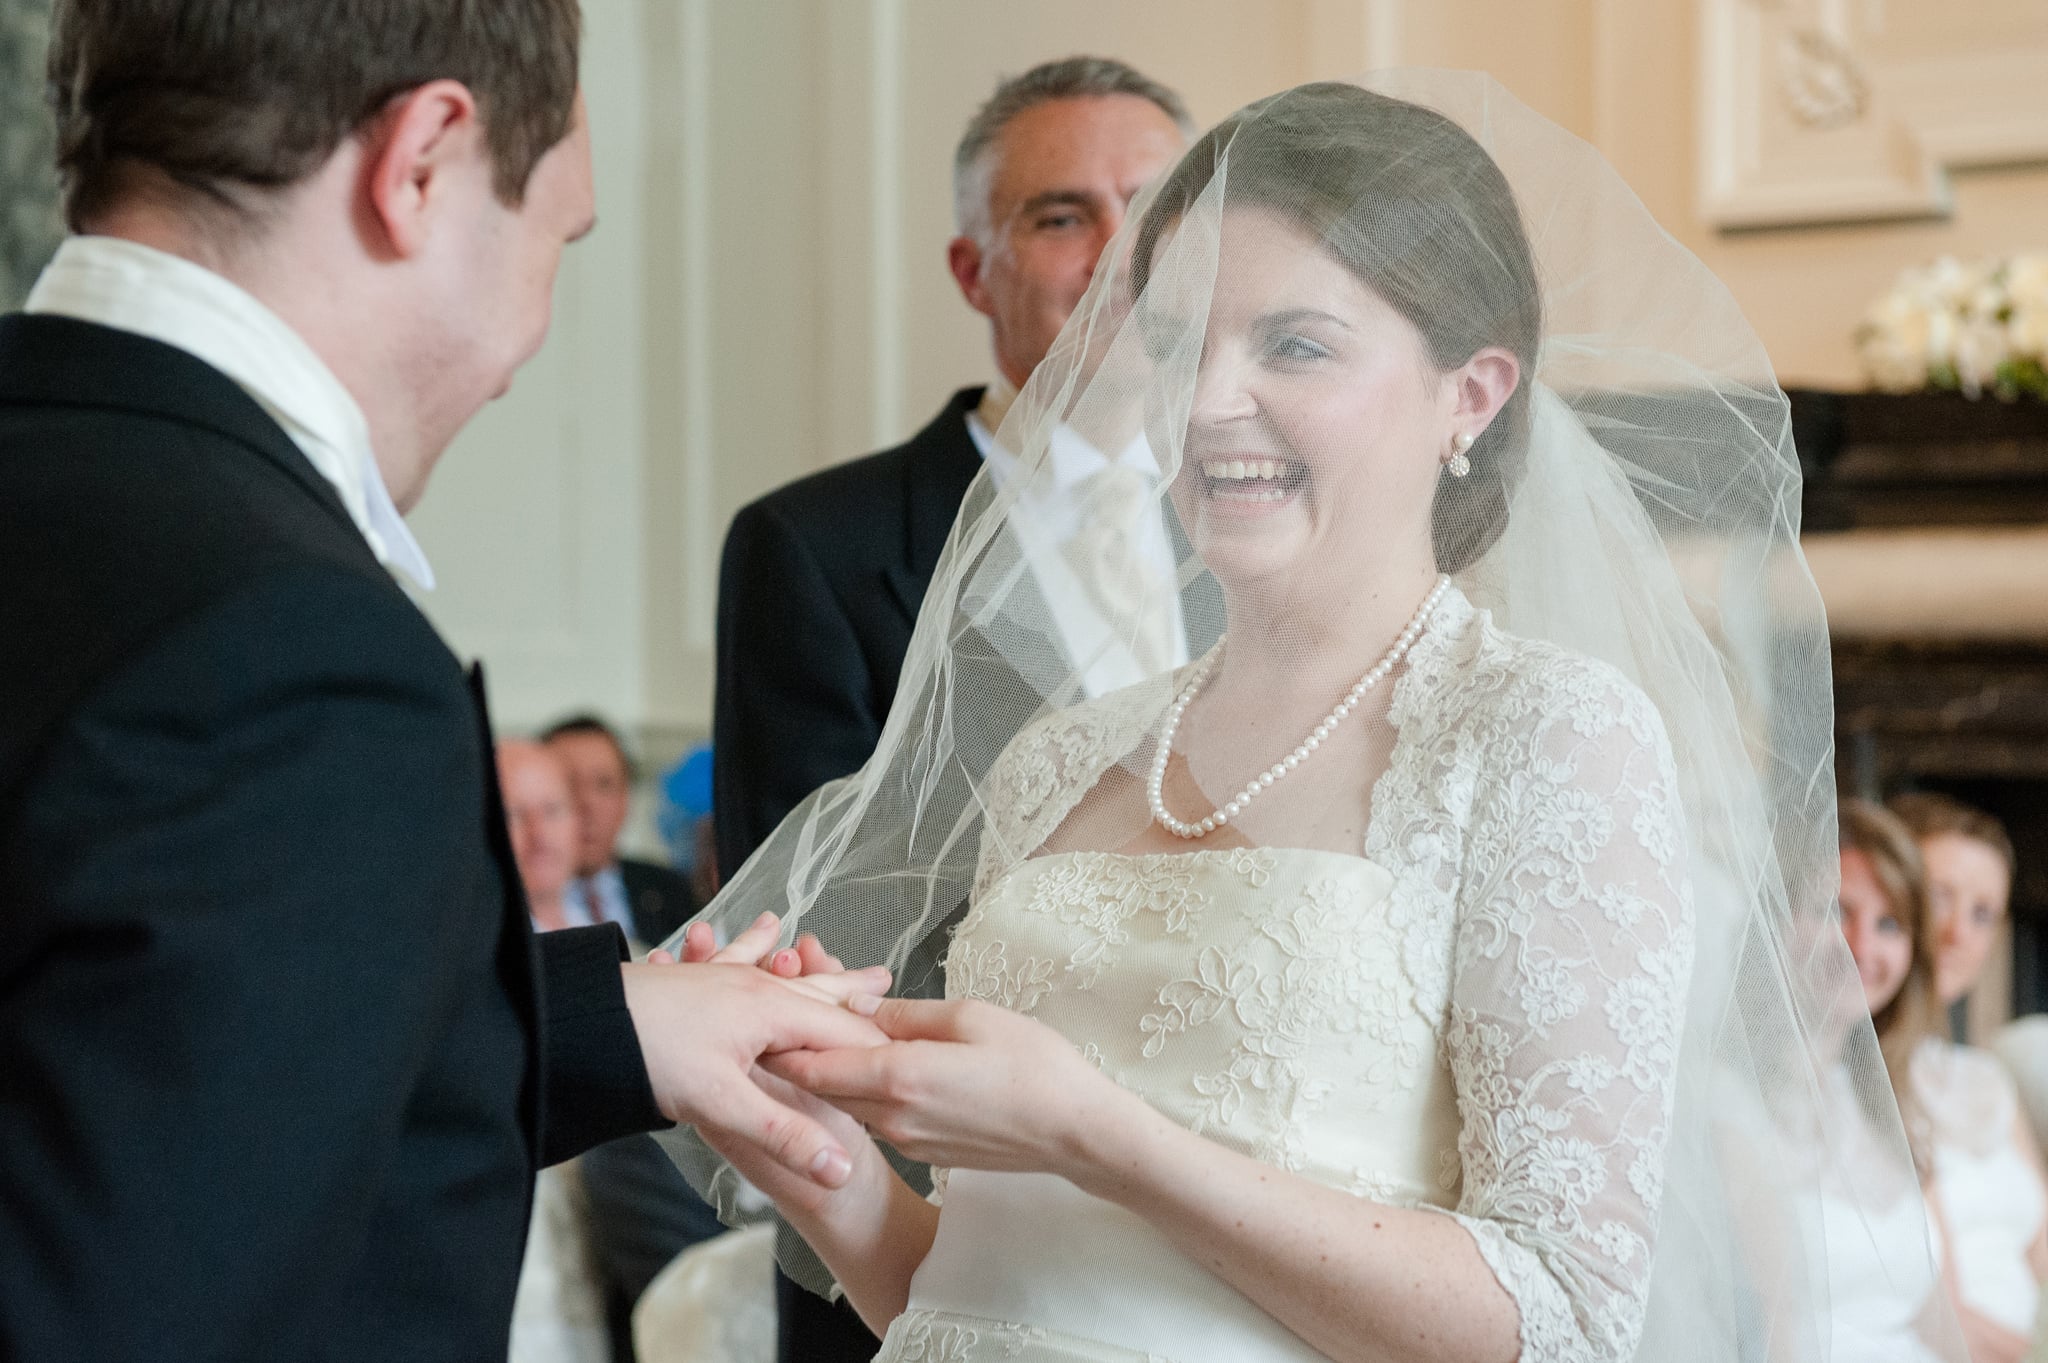 Bride laughing as she tries to put Groom's wedding ring on